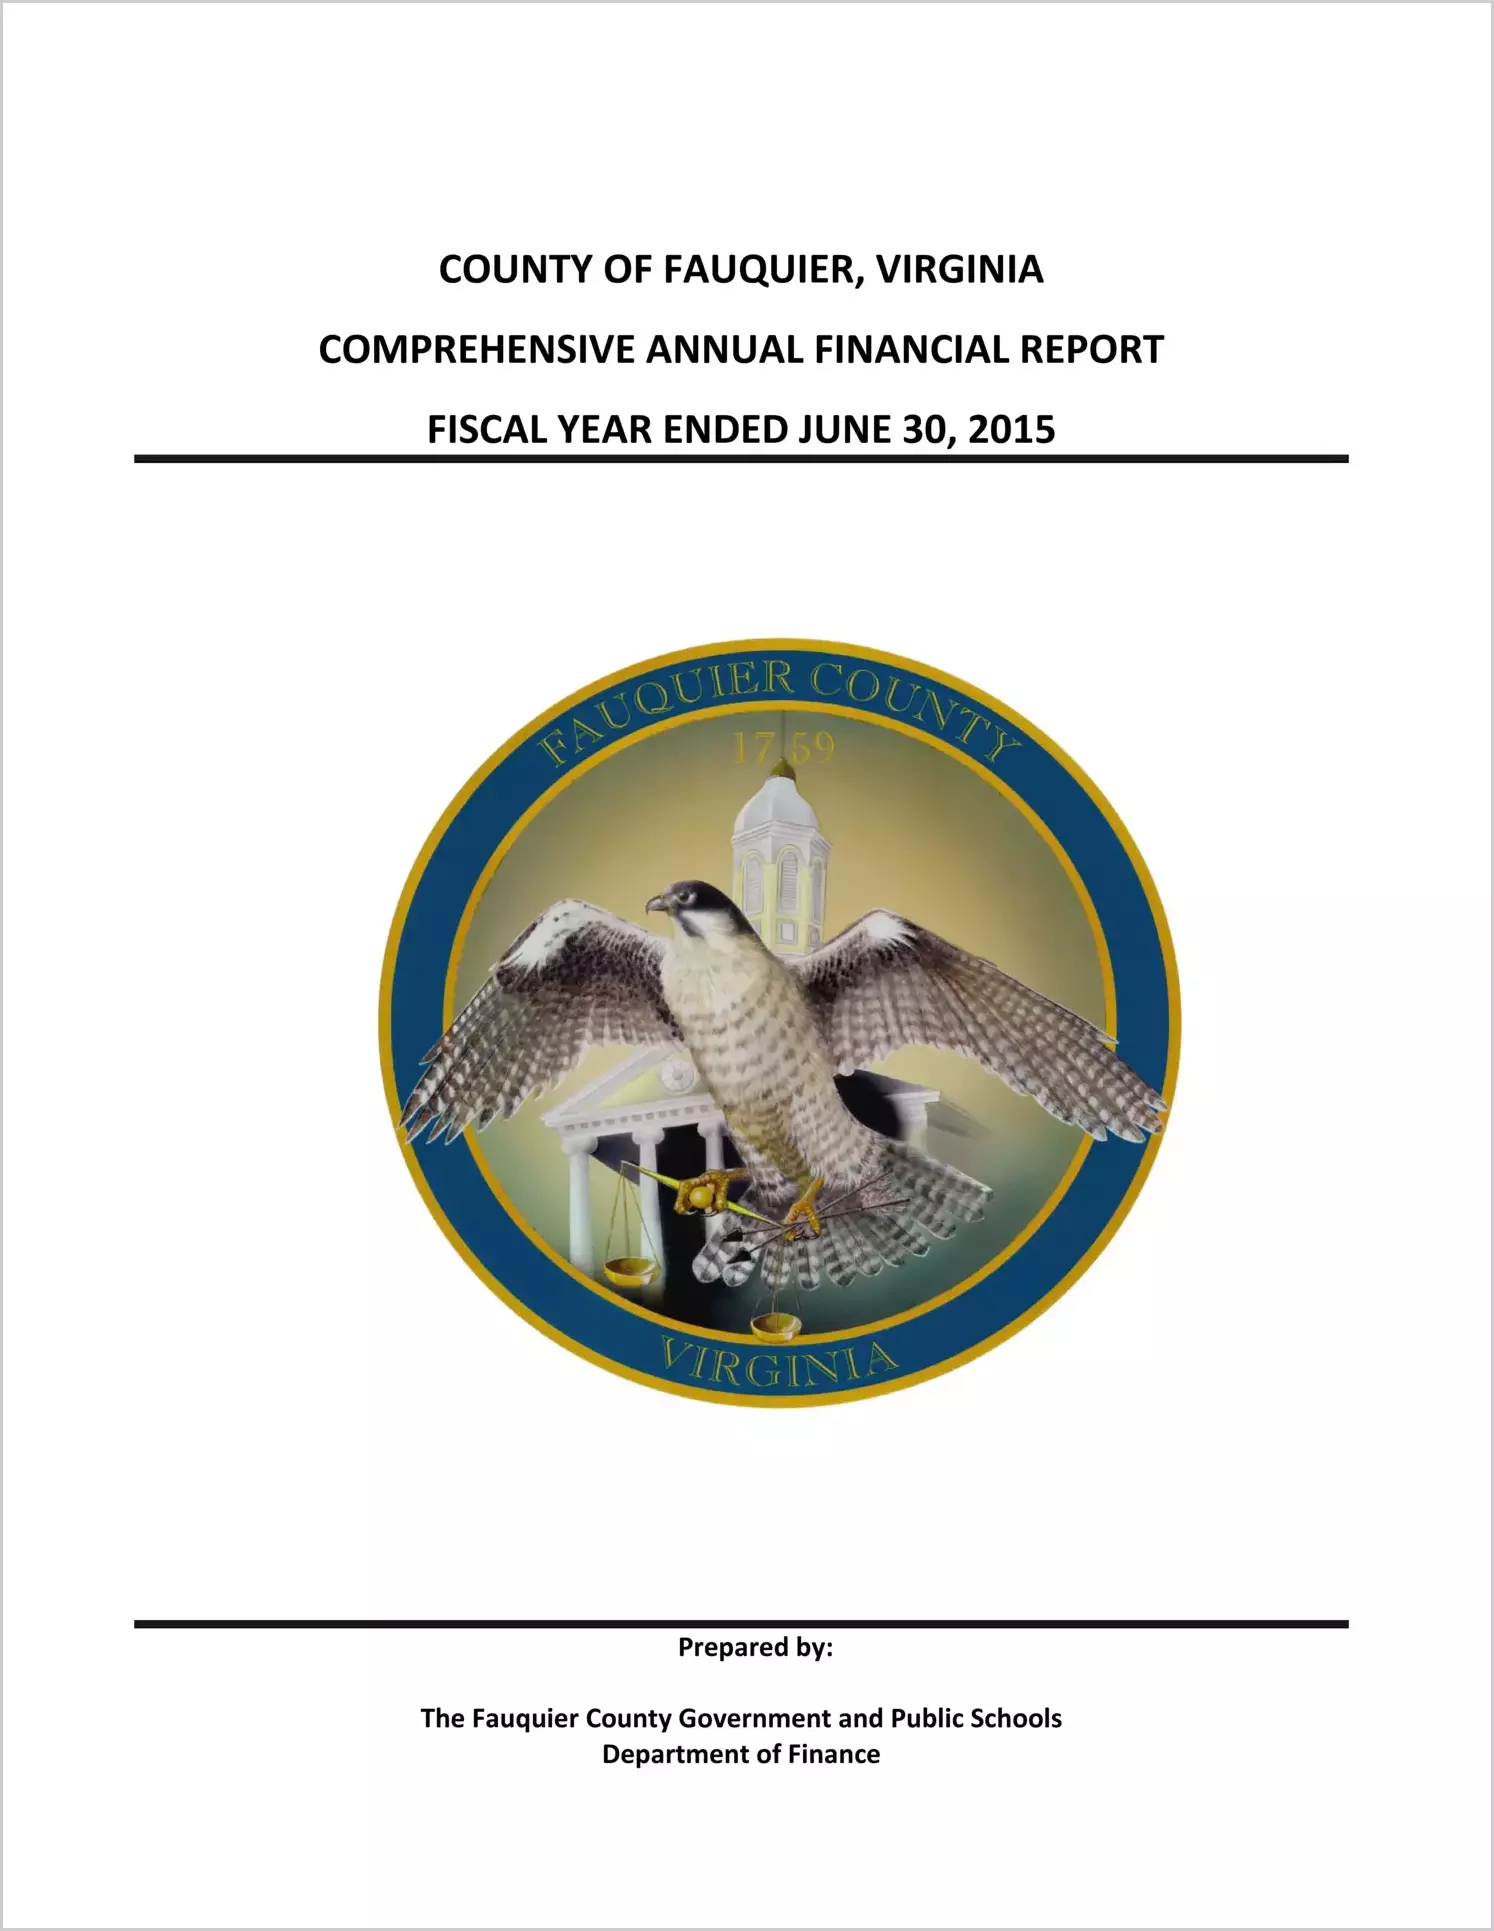 2015 Annual Financial Report for County of Fauquier